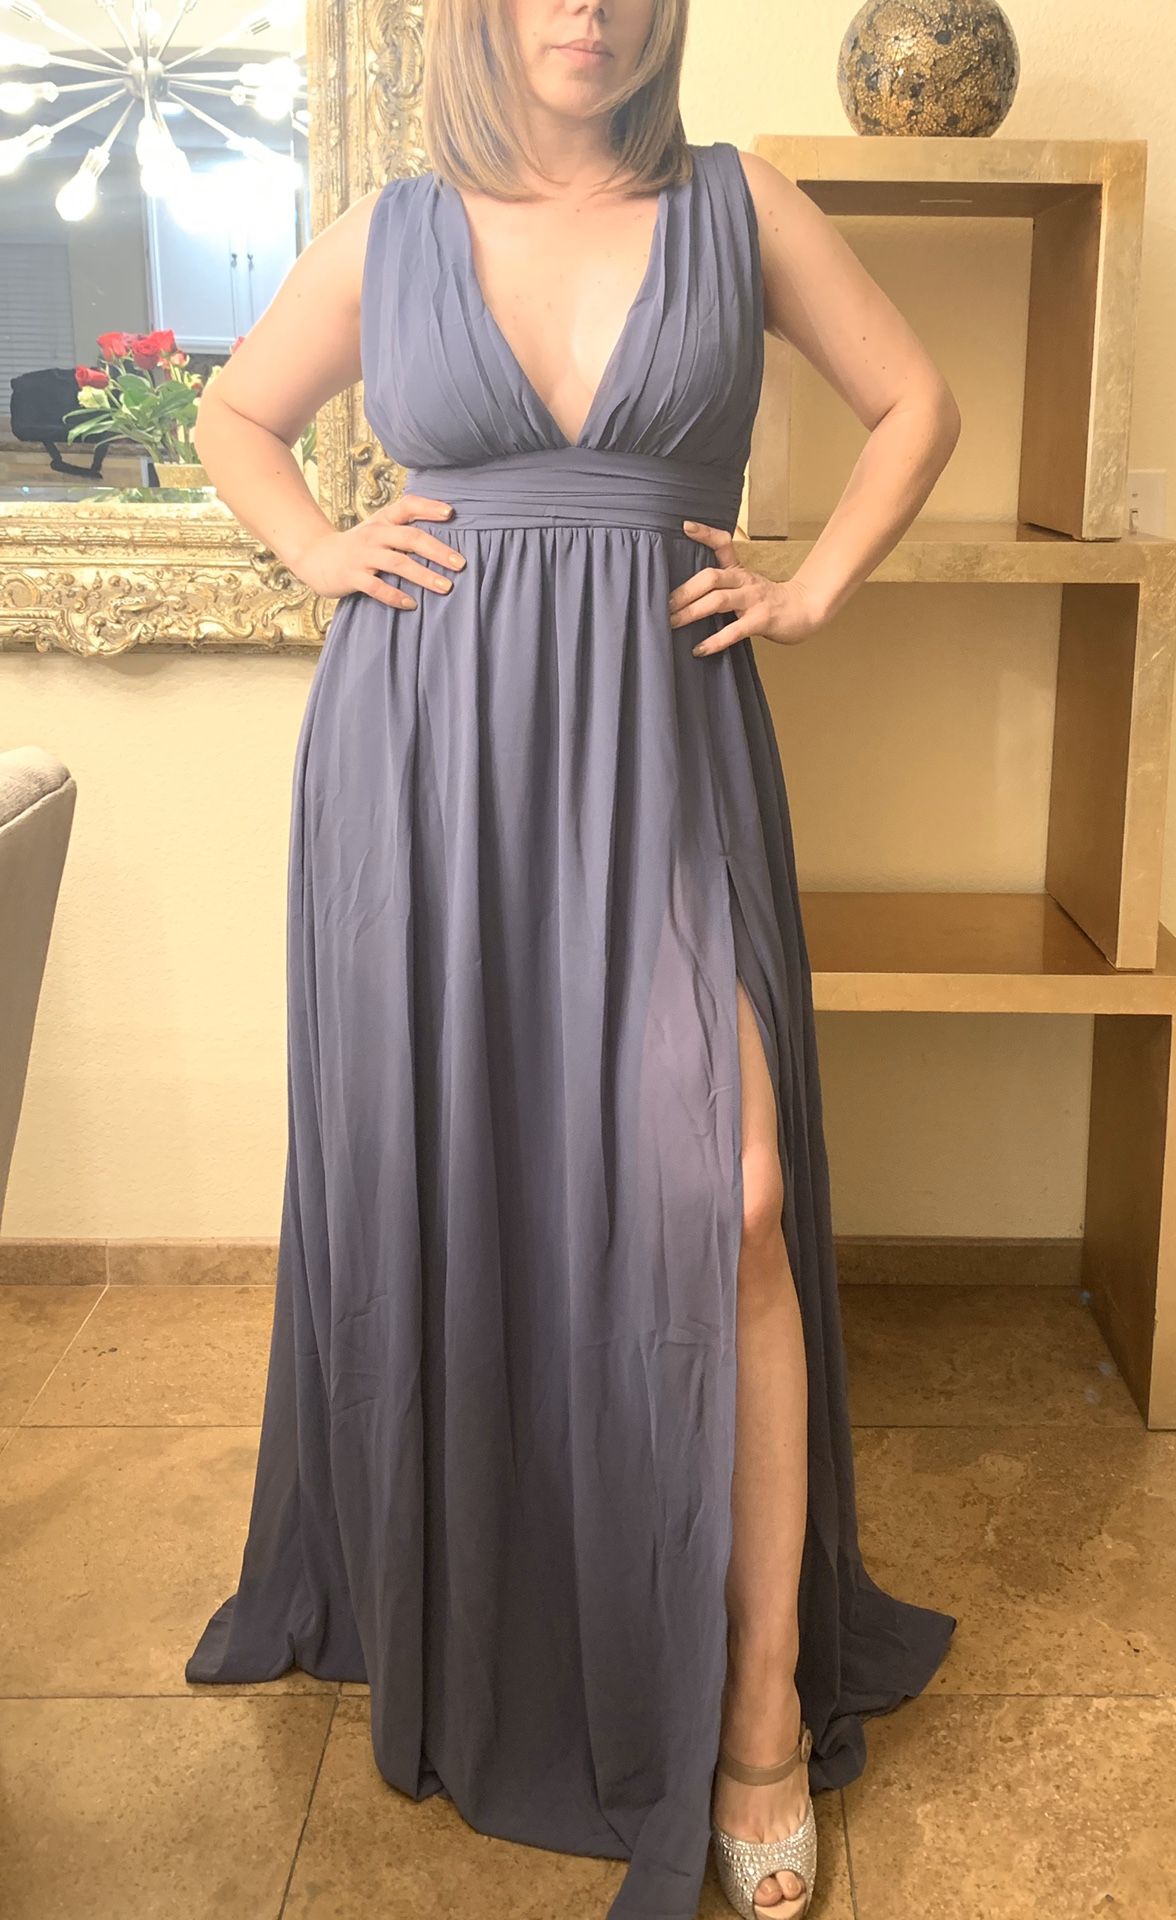 Small elegant dress( perfect for prom)